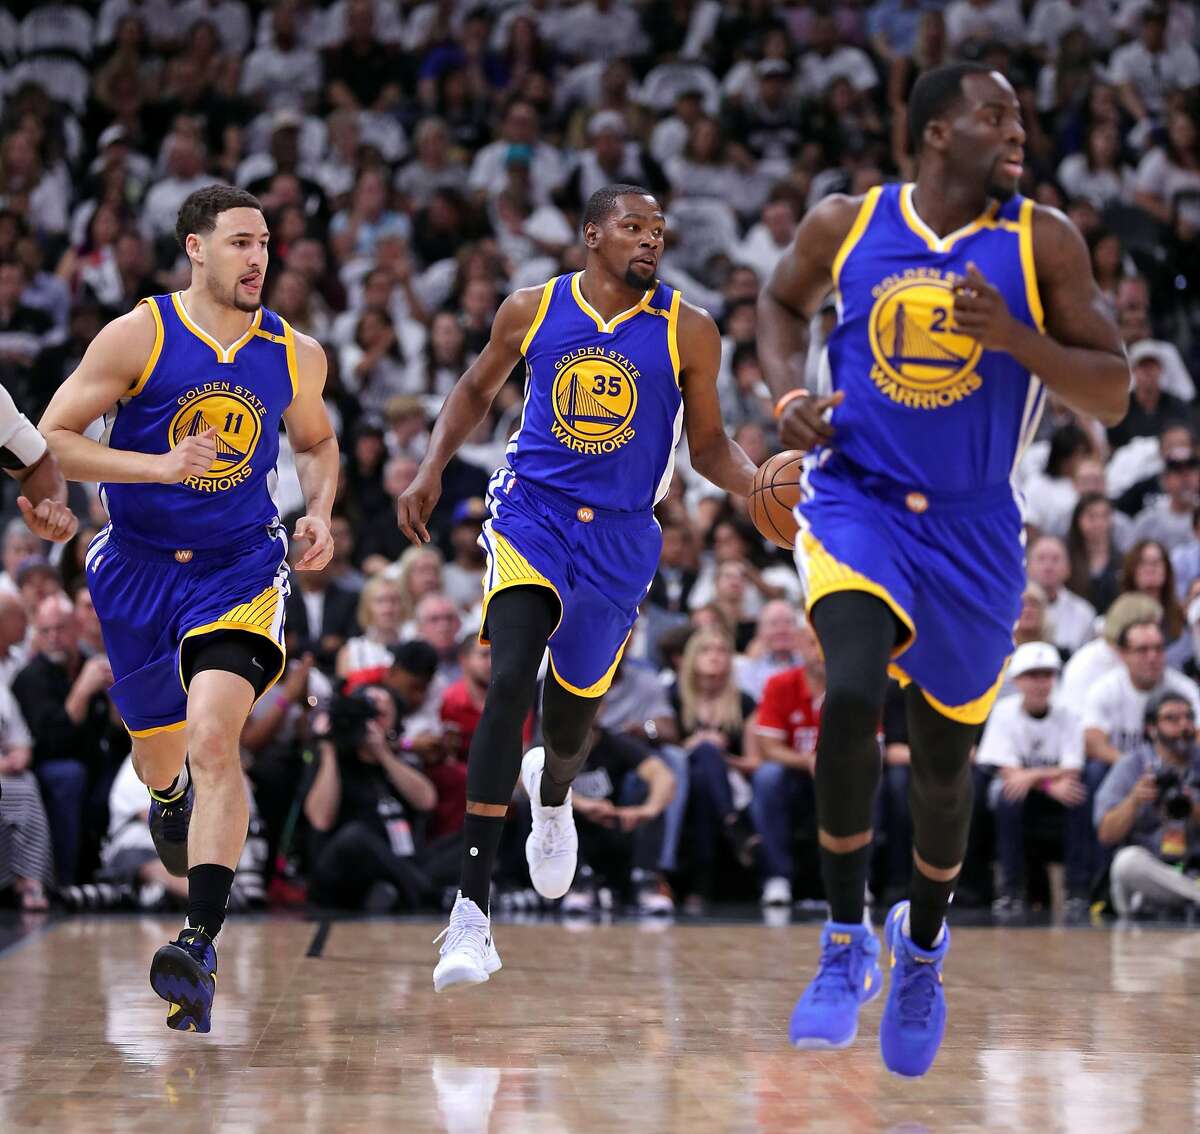 Golden State Warriors' Kevin Durant brings the ball up court flanked by Klay Thompson and Draymond Green in 1st quarter against San Antonio Spurs'during Game 3 of NBA Western Conference Finals at AT&T Center in San Antonio, Texas, on Saturday, May 20, 2017.